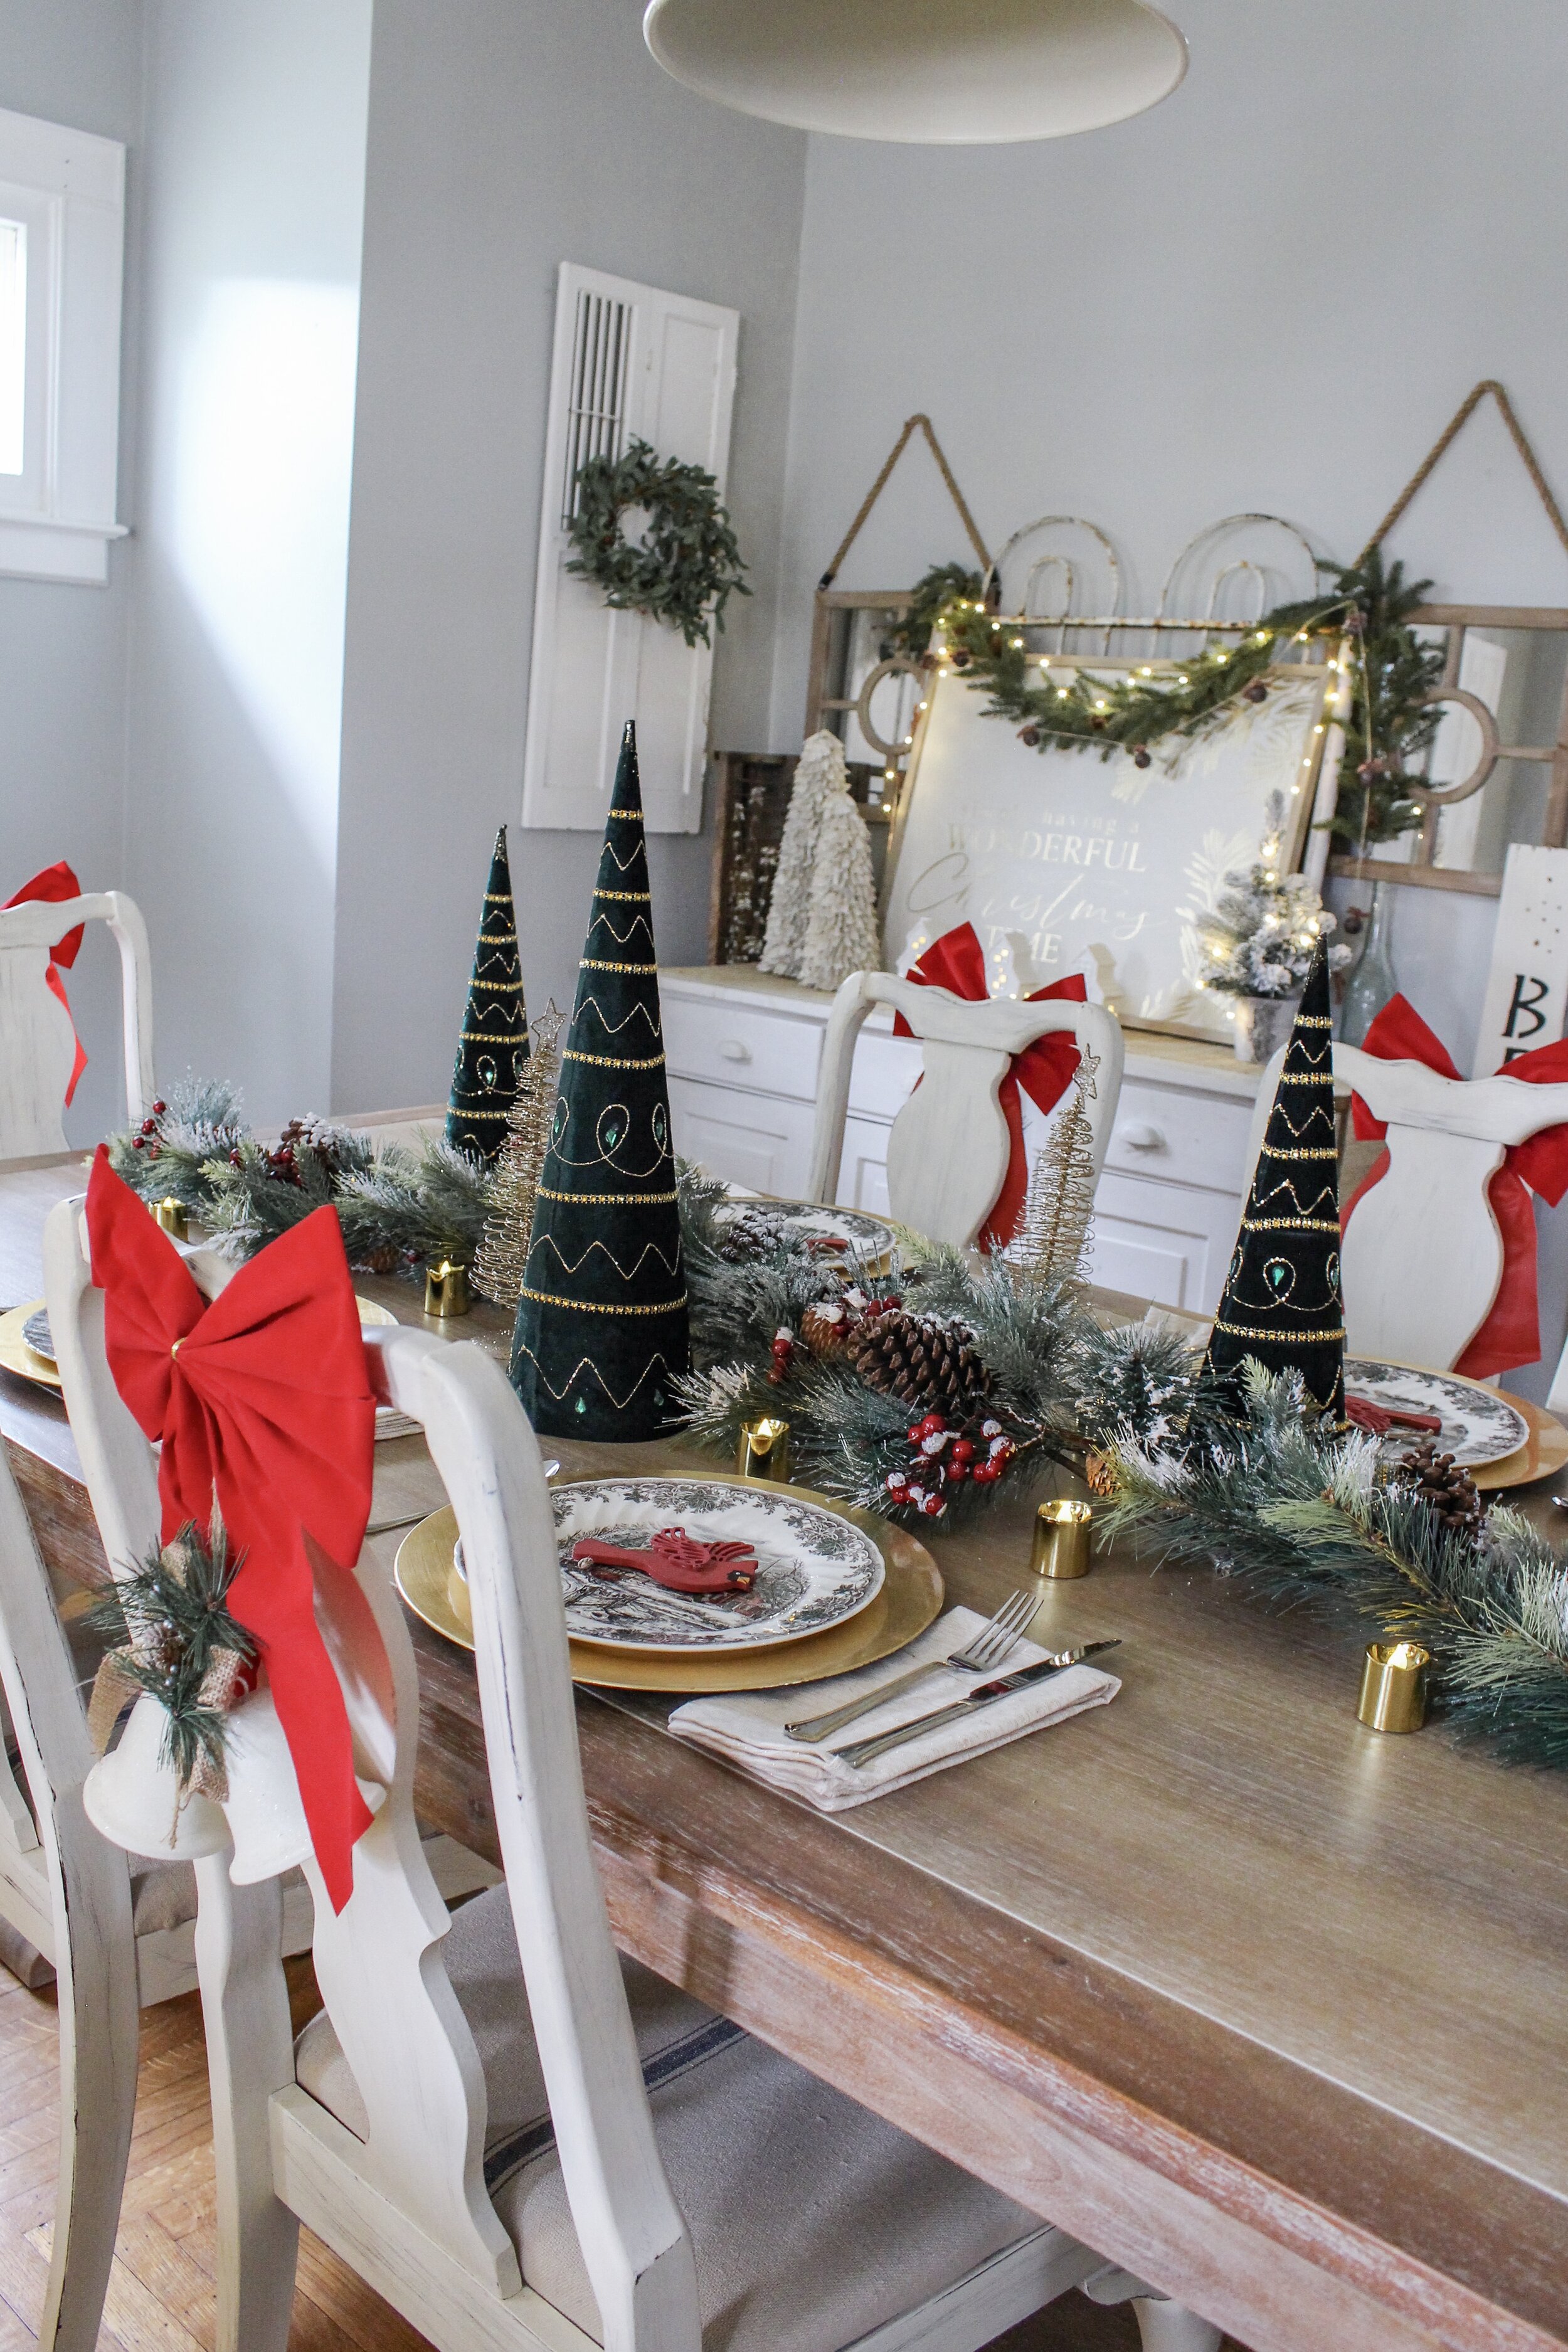 ECO_FRIENDLY TREE OR TABLE DECORATIONS Details about   RETRO STYLE CHRISTMAS XMAS DECORATIONS 